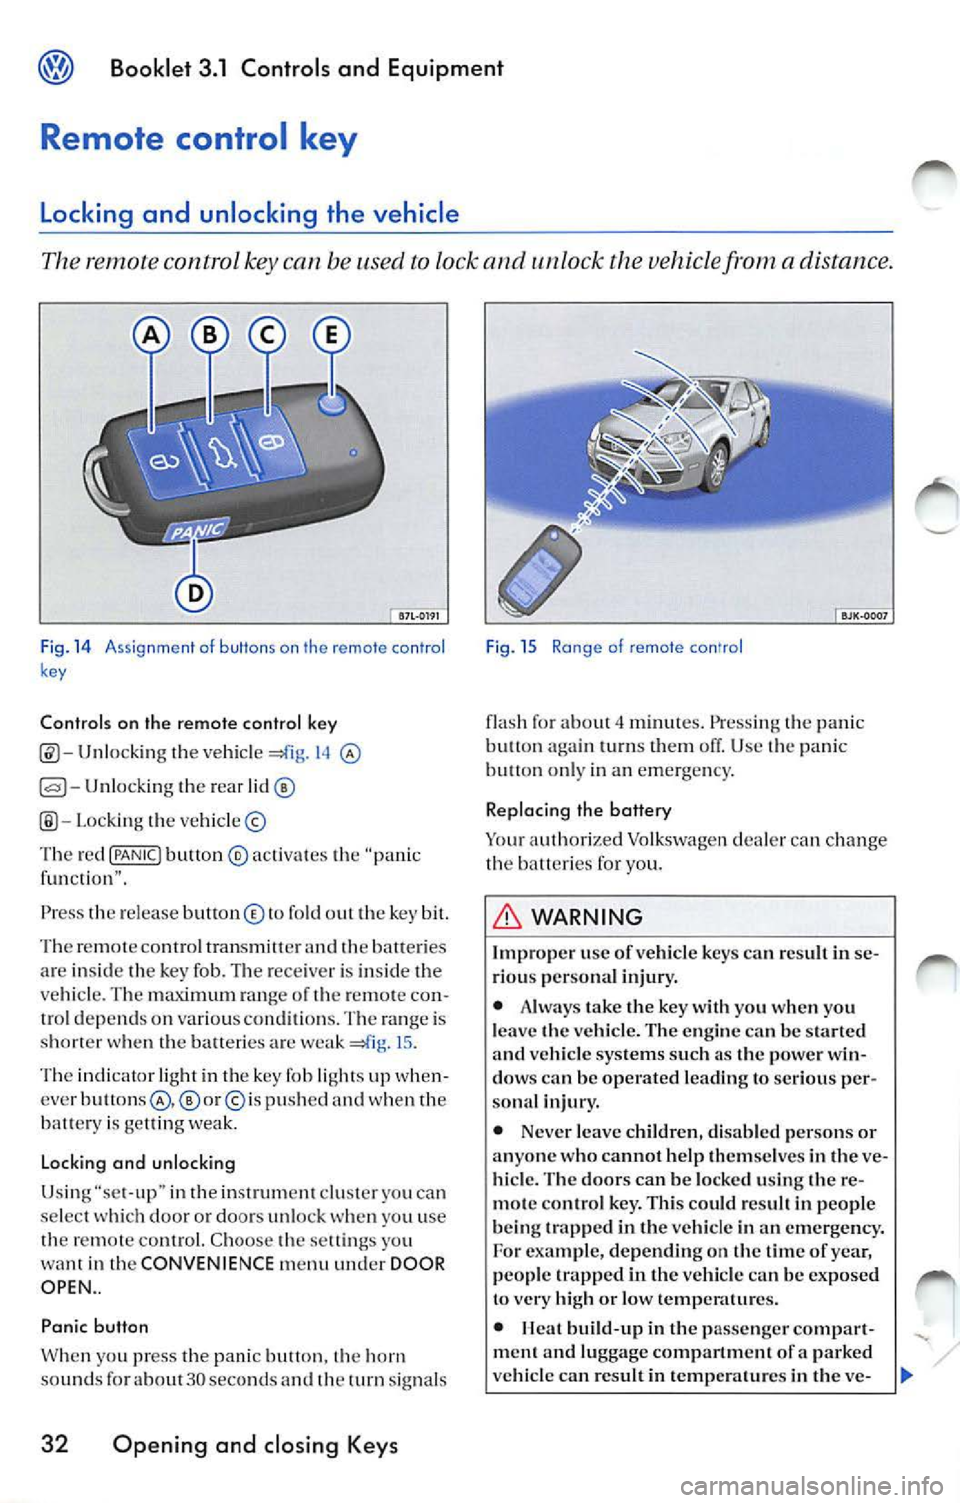 VOLKSWAGEN JETTA 2010  Owners Manual Booklet  3.1  Controls  and  Equipment 
Remote  control  key 
Locking  and  unlocking  the  vehicle 
The remote  control  key can  be used to lock and  unlock  the  vehicle  from a distance. 
Fig. 14 